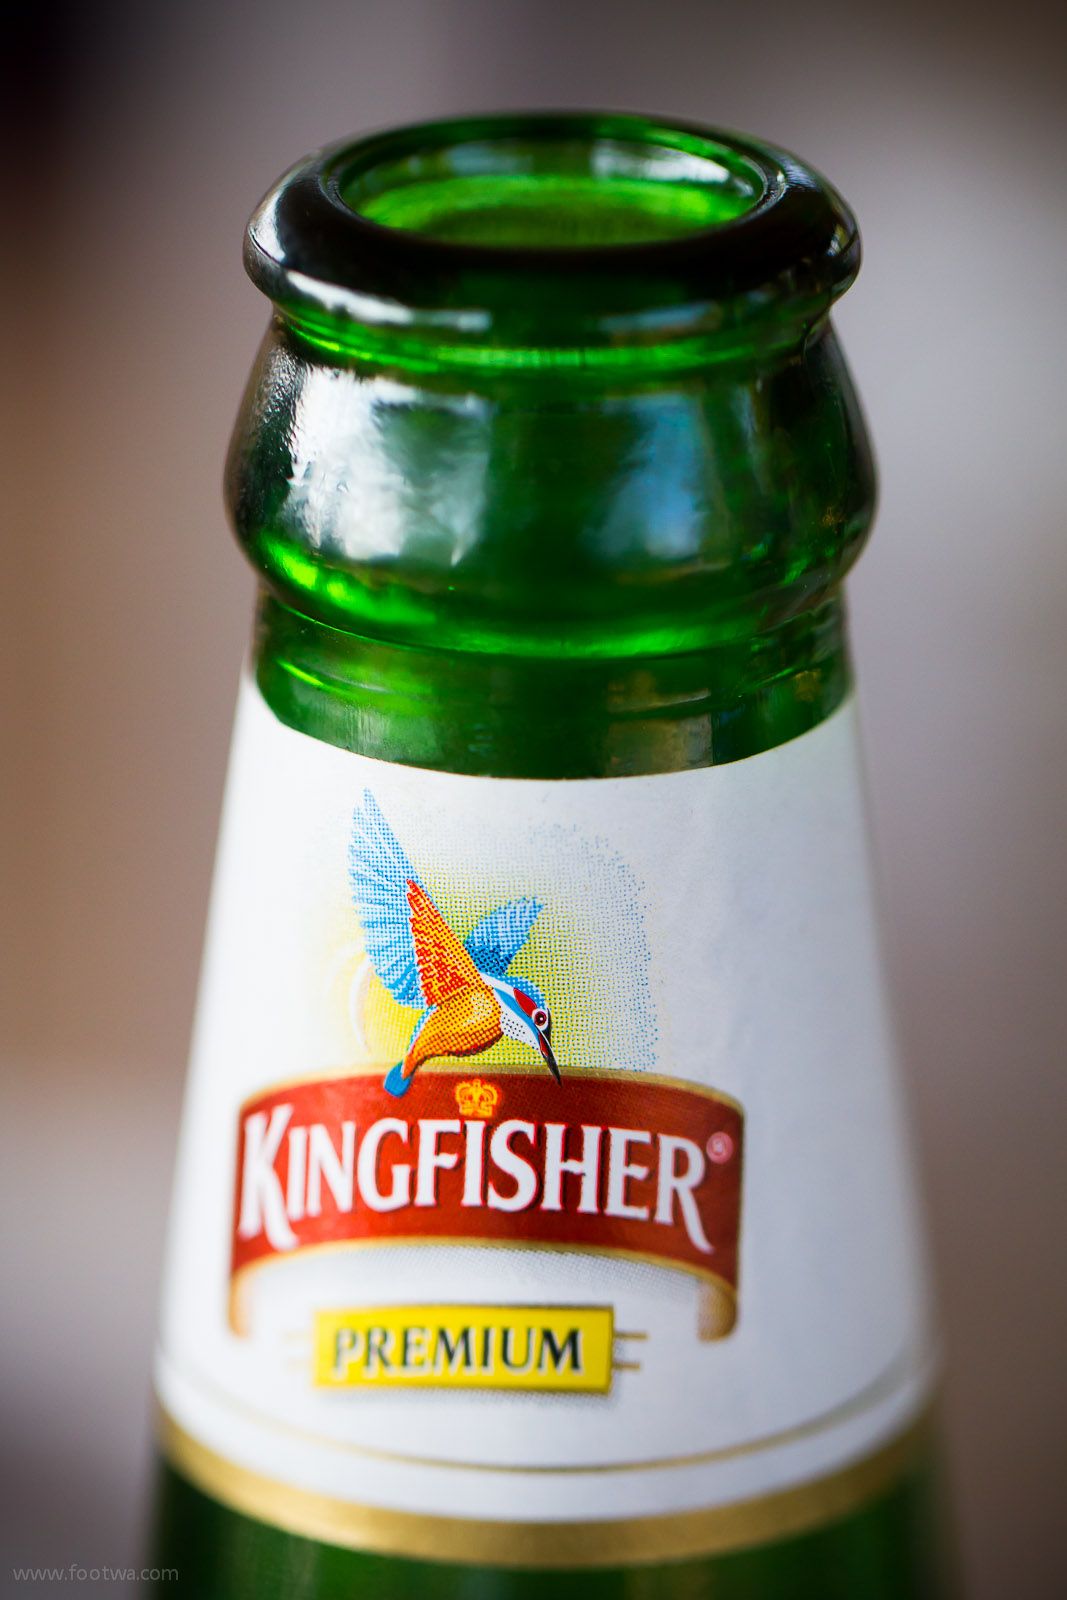 Kingfisher tops most trusted alcoholic beverage brands list